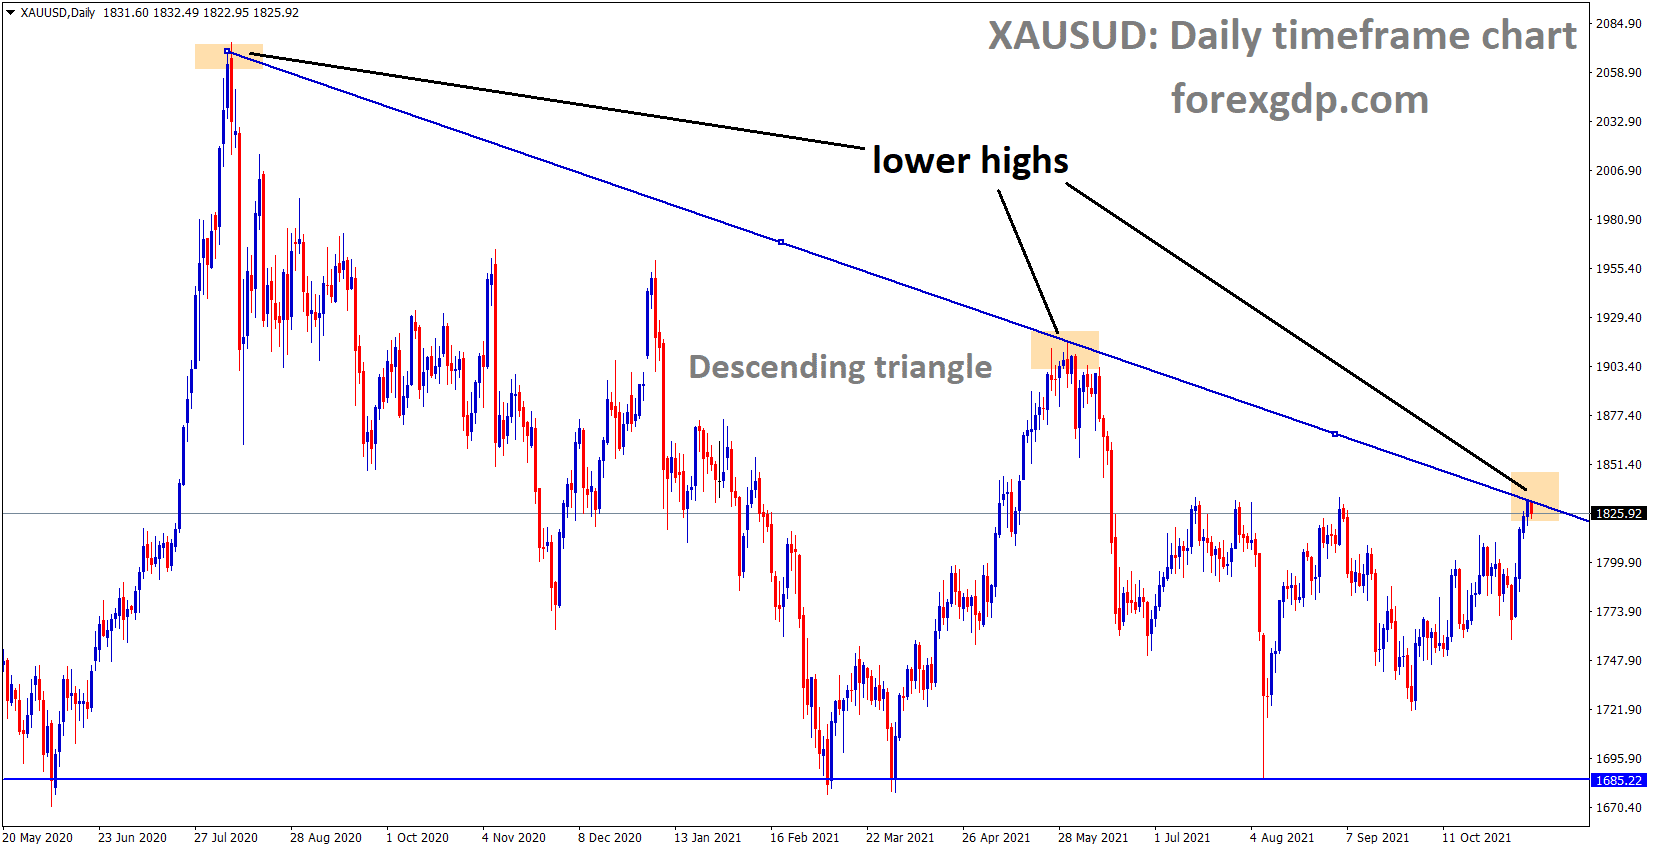 XAUUSD Gold price is exactly reached and fell from the lower high